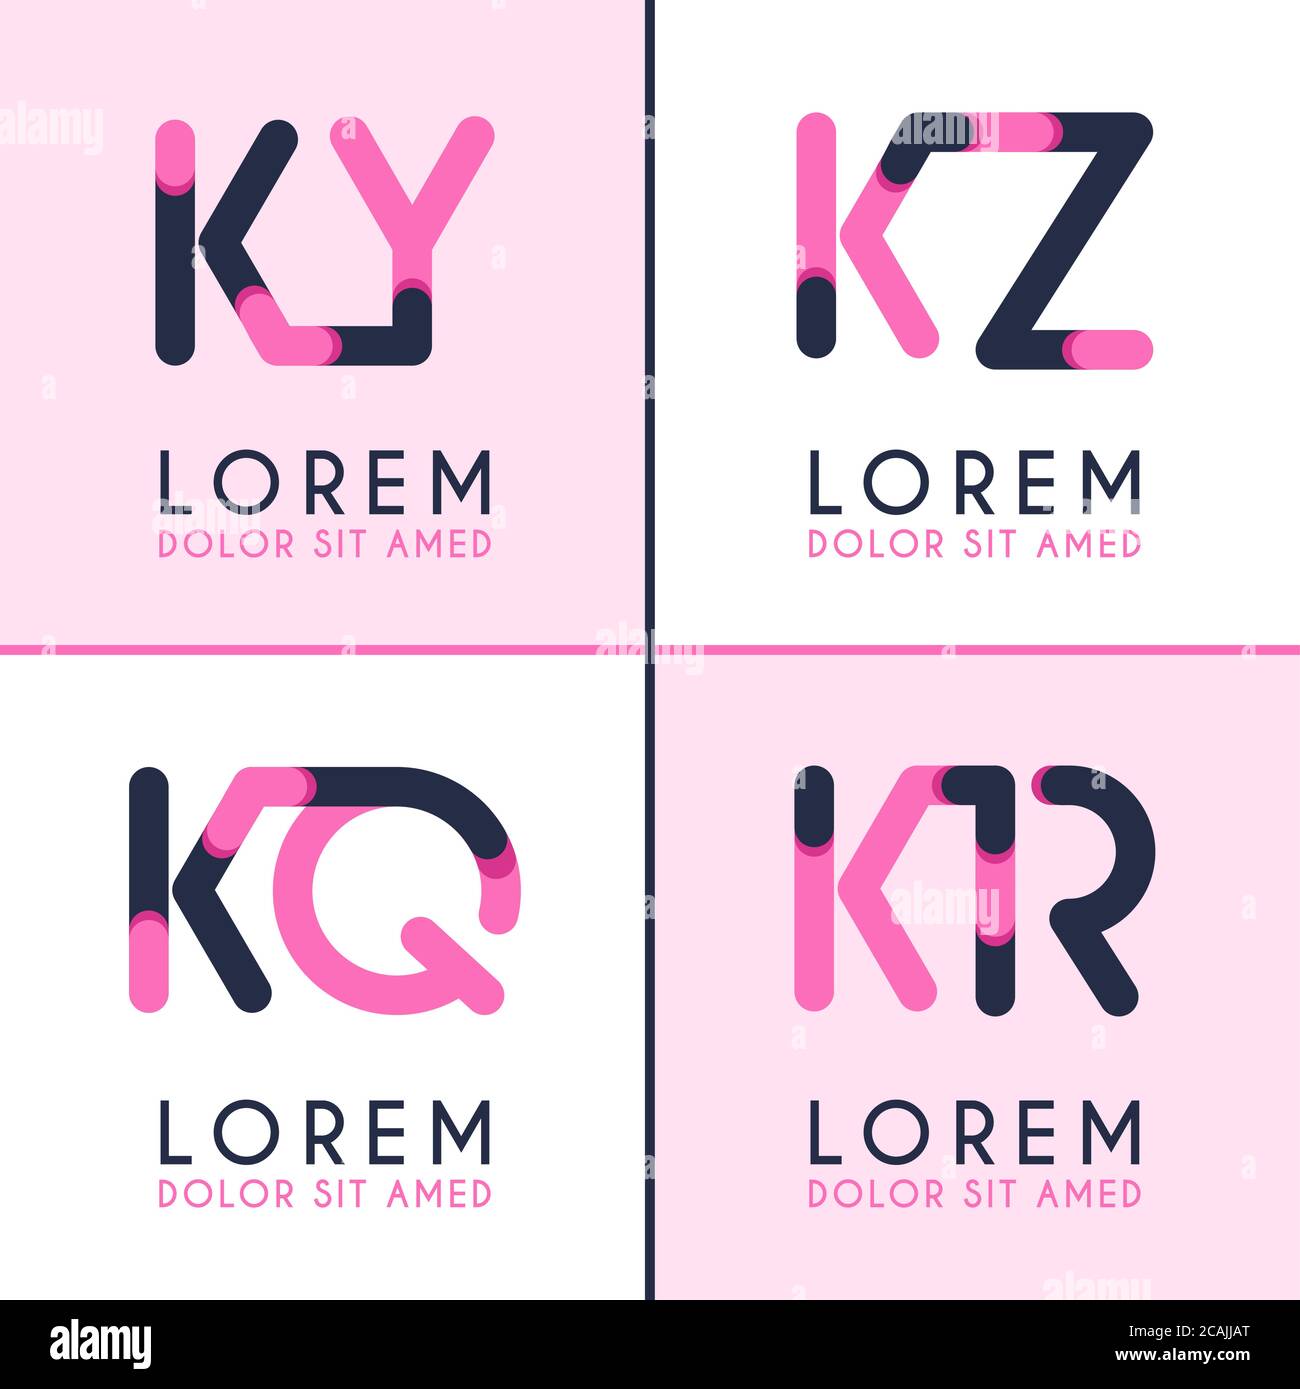 KY logo for businesses and companies. KZ template logo for poster. KQ logo illustration can be for websites and apps. Letter KR logo for social media Stock Vector